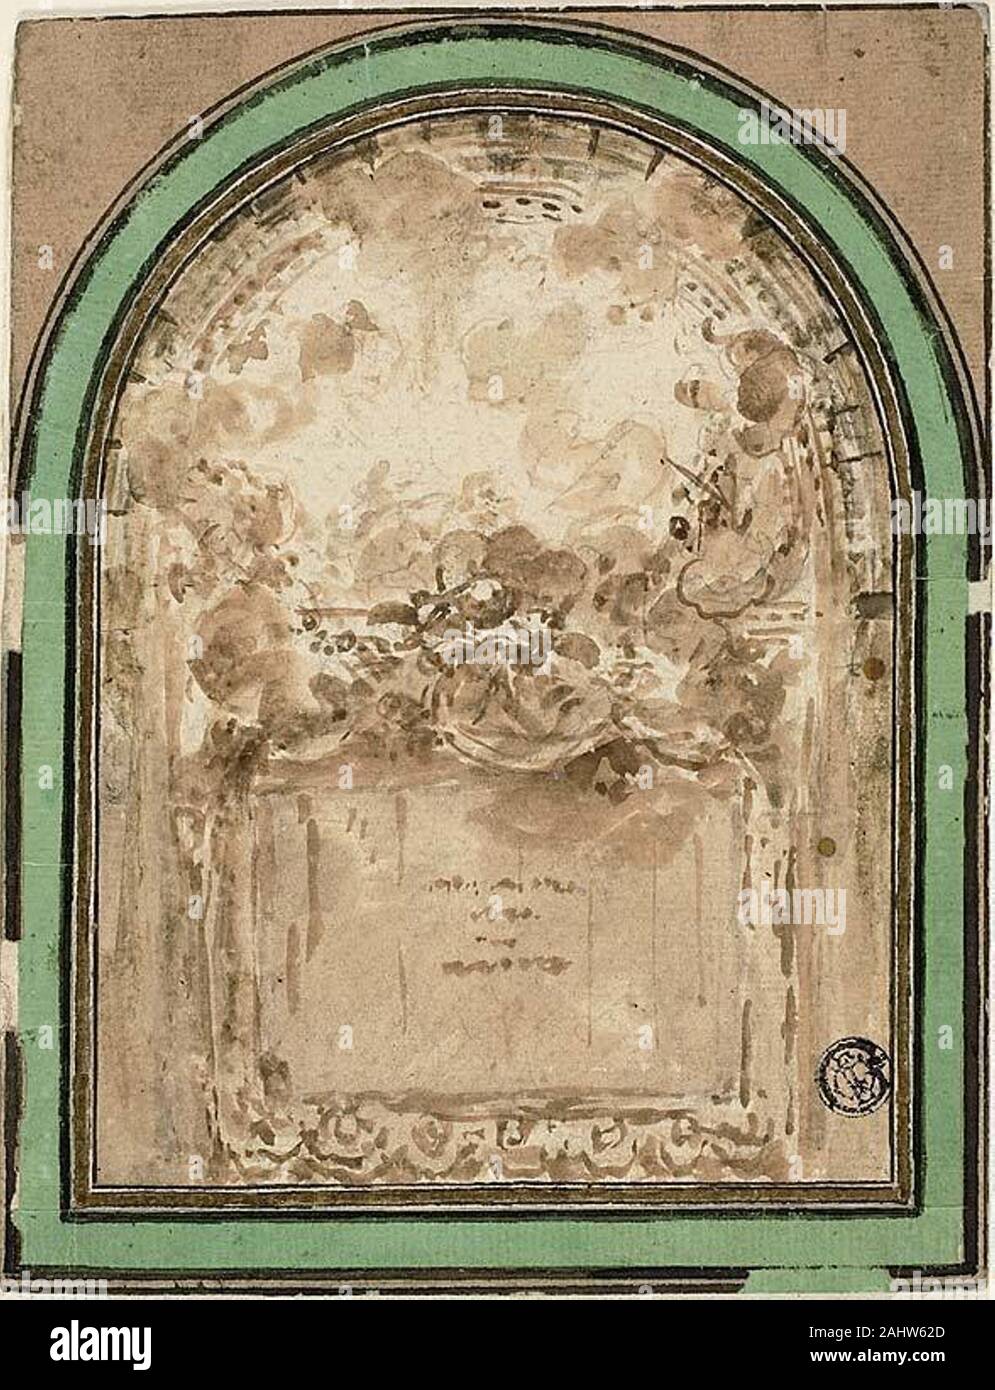 Claude Nicolas Ledoux. Project for the Ceiling of the Salle de Spectacle de  Besancon. 1766–1806. France. Brush and brown wash, over traces of graphite,  on ivory laid paper (lunette), laid down on